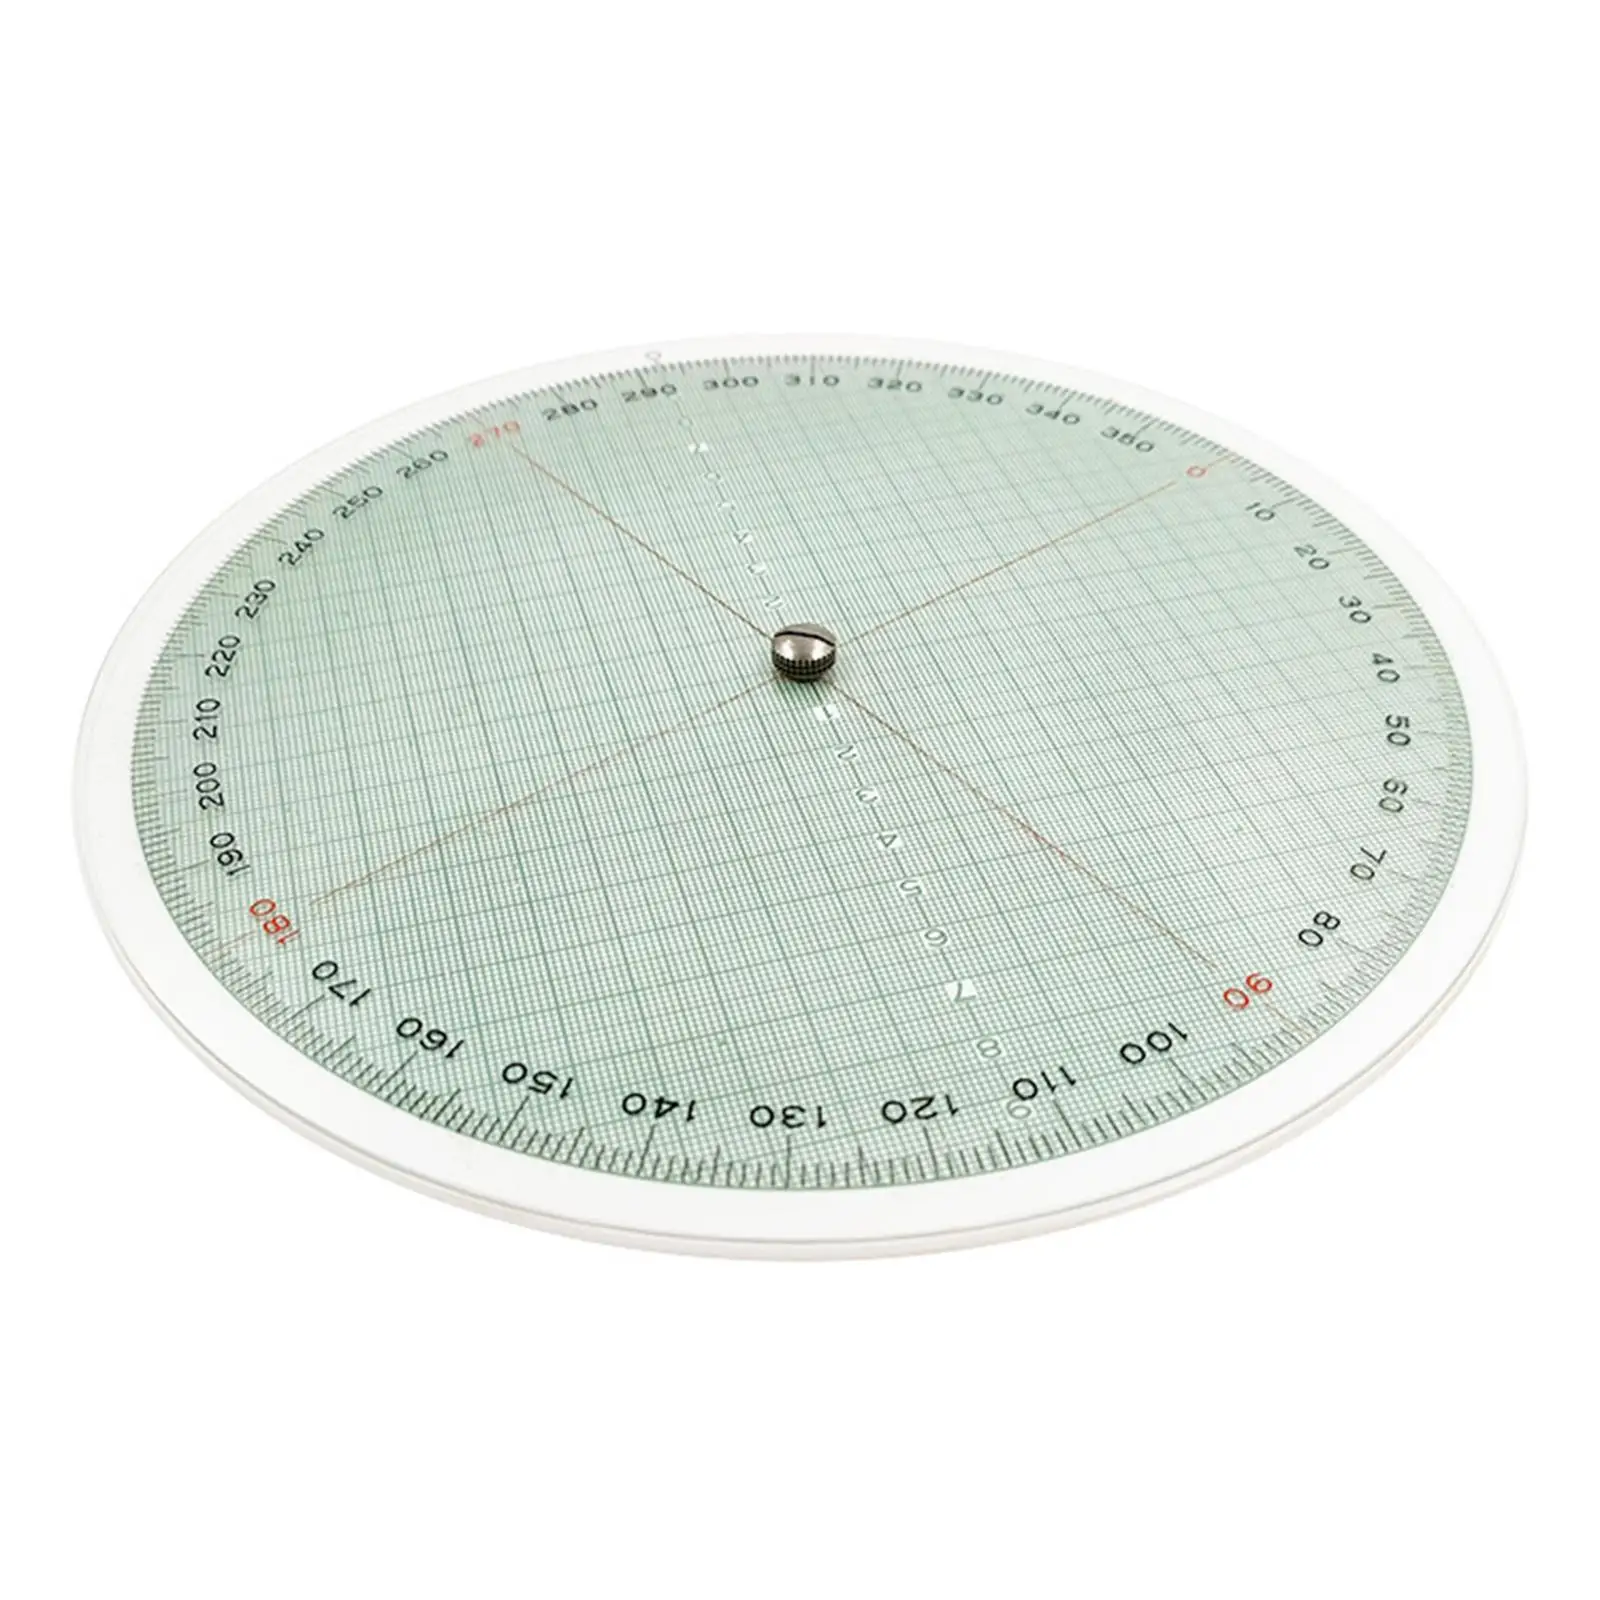 Nautical Slide Rule Easy to Use Portable Stable Plotting Measuring Scale Accessories Wind Calculator Navigation Tool